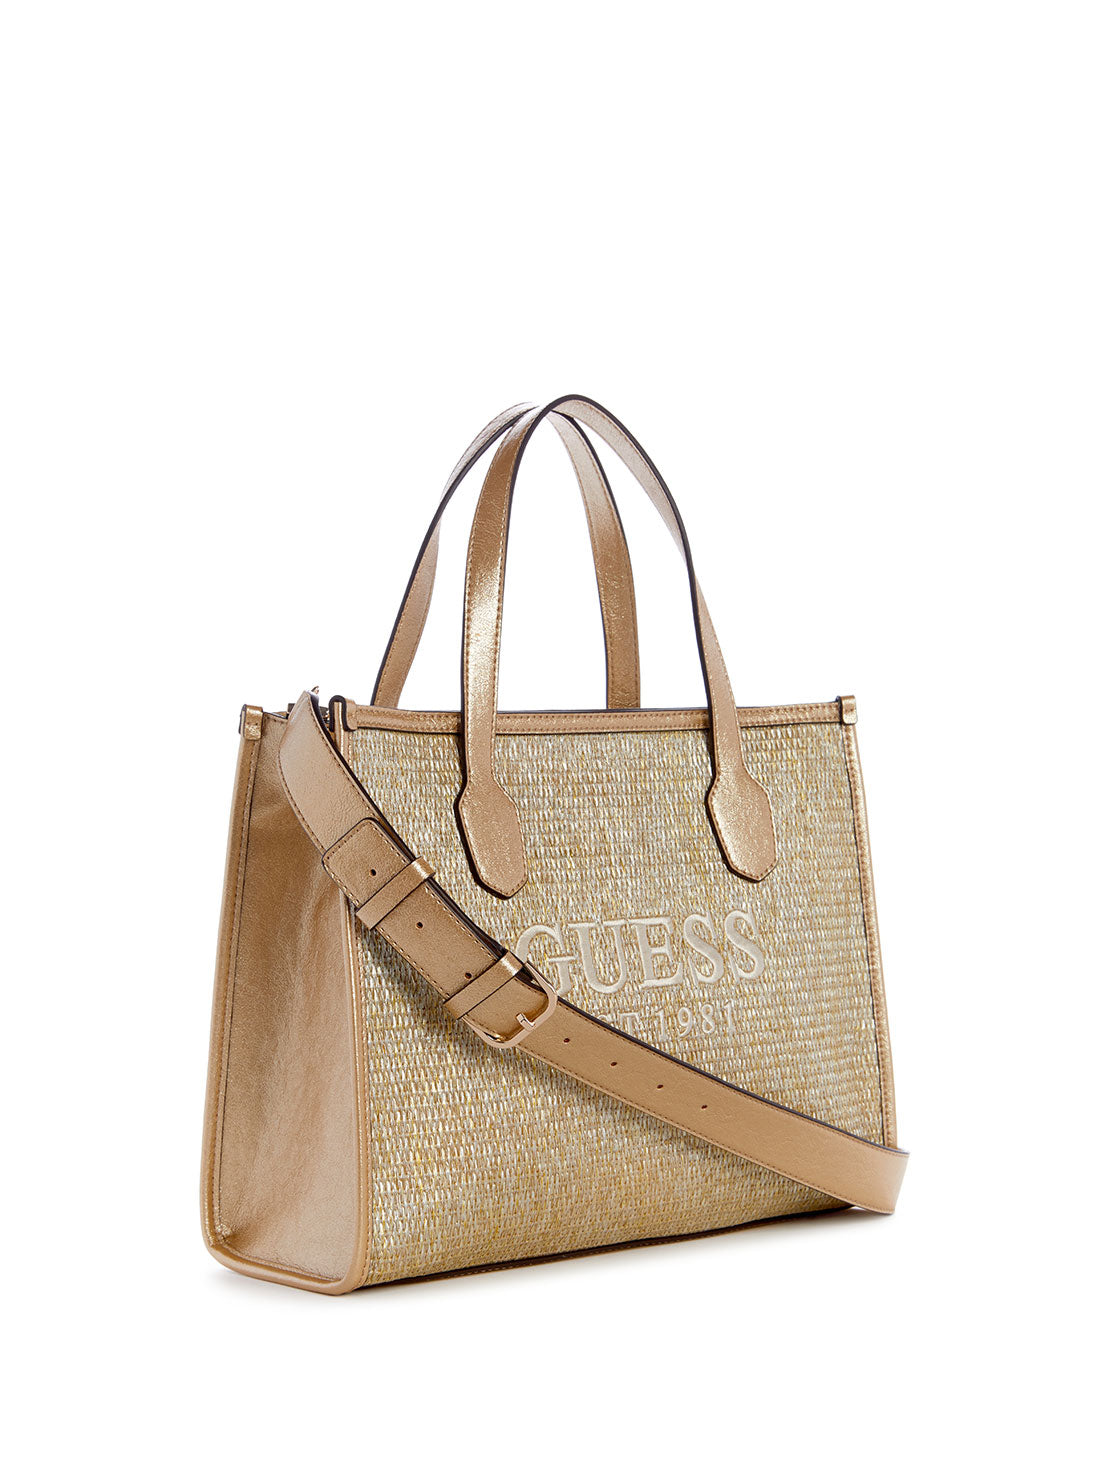 GUESS Gold Silvana Tote Bag side view